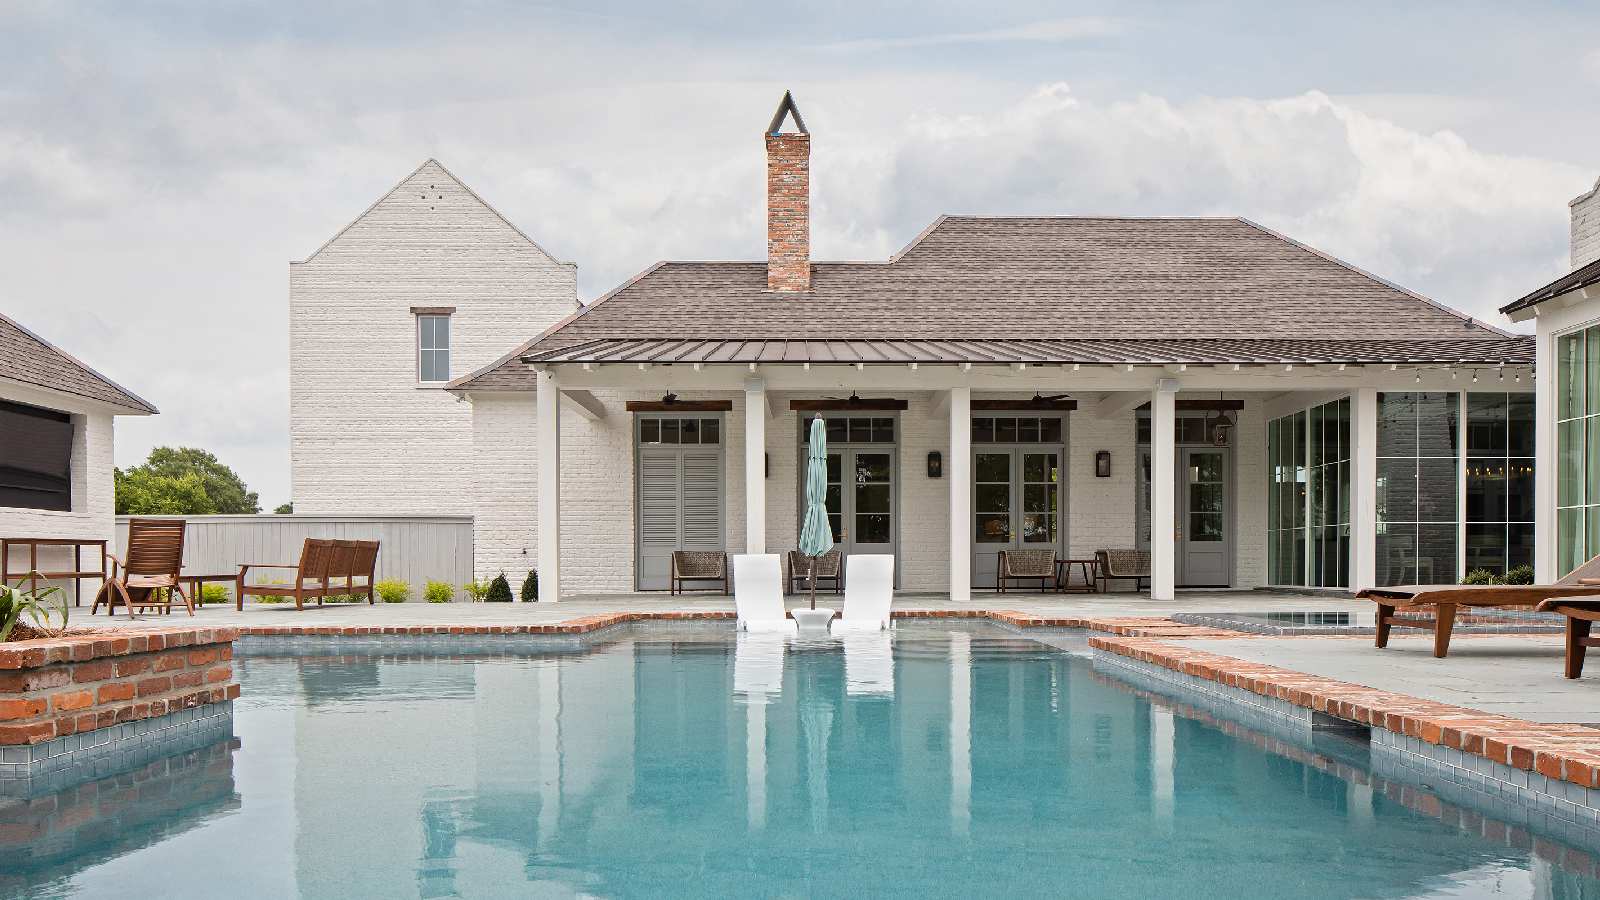 Exterior view of the pool at Oak Alley, a custom home designed and built by Farmer Payne Architects.